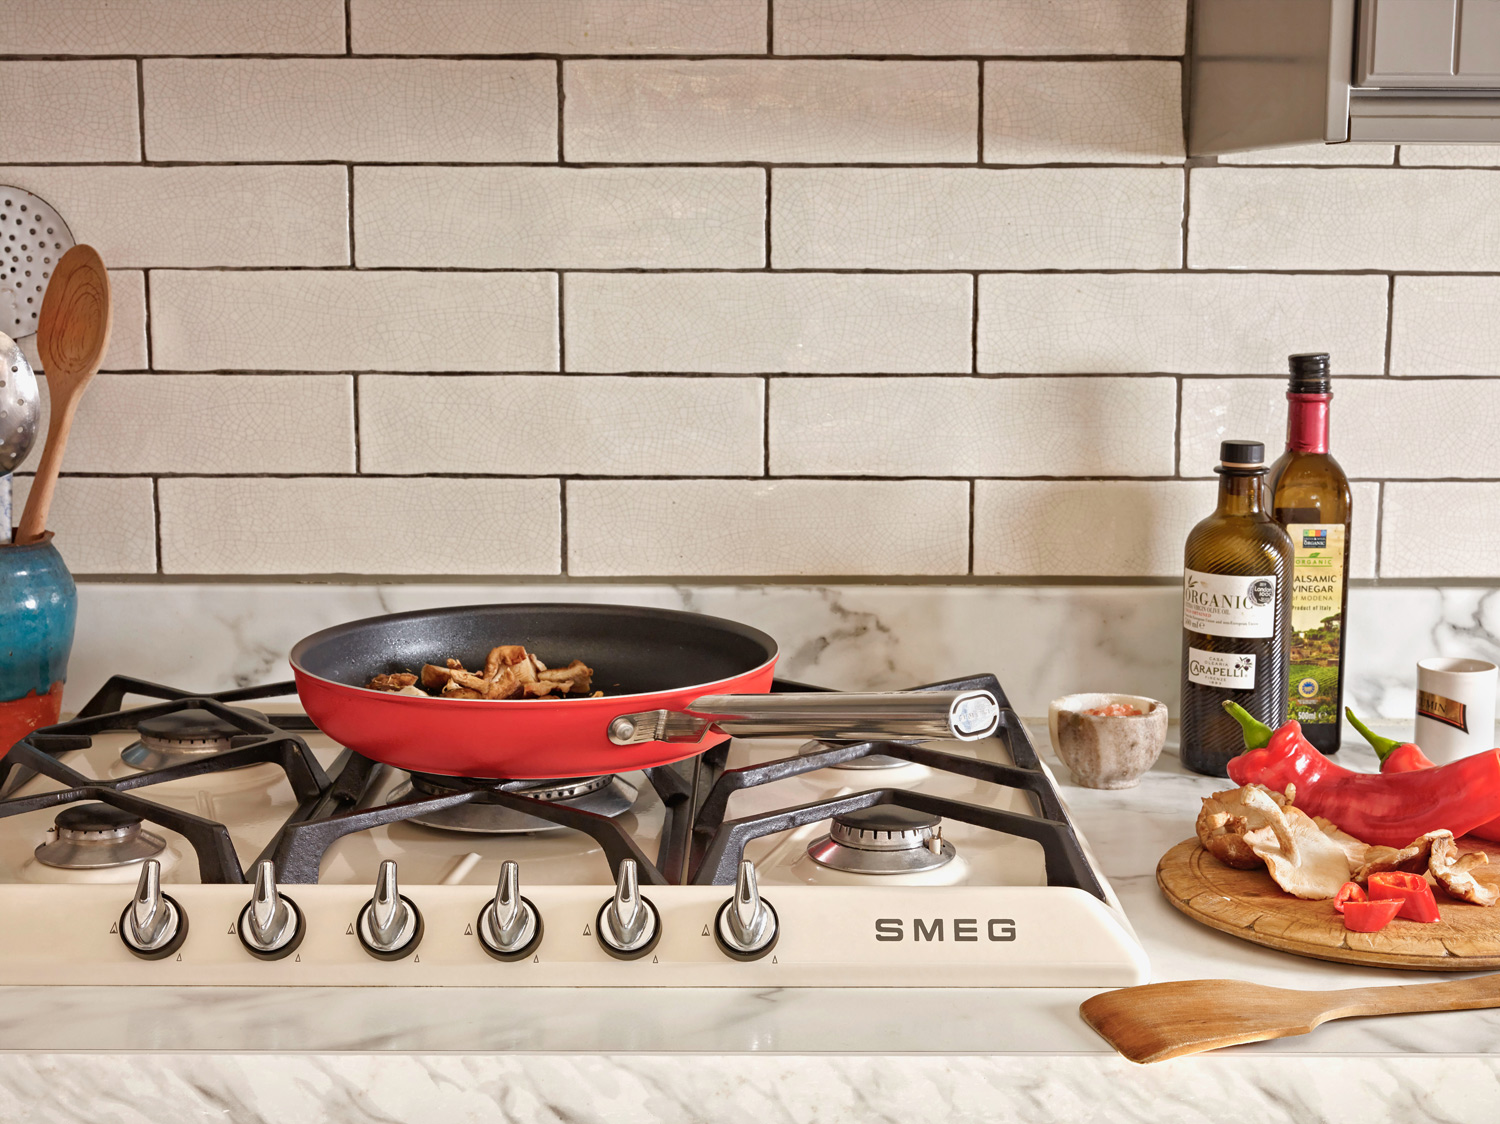 https://www.luxuriousmagazine.com/wp-content/uploads/2021/05/SMEG-frying-pan-in-red-from-their-cookware-range.jpg